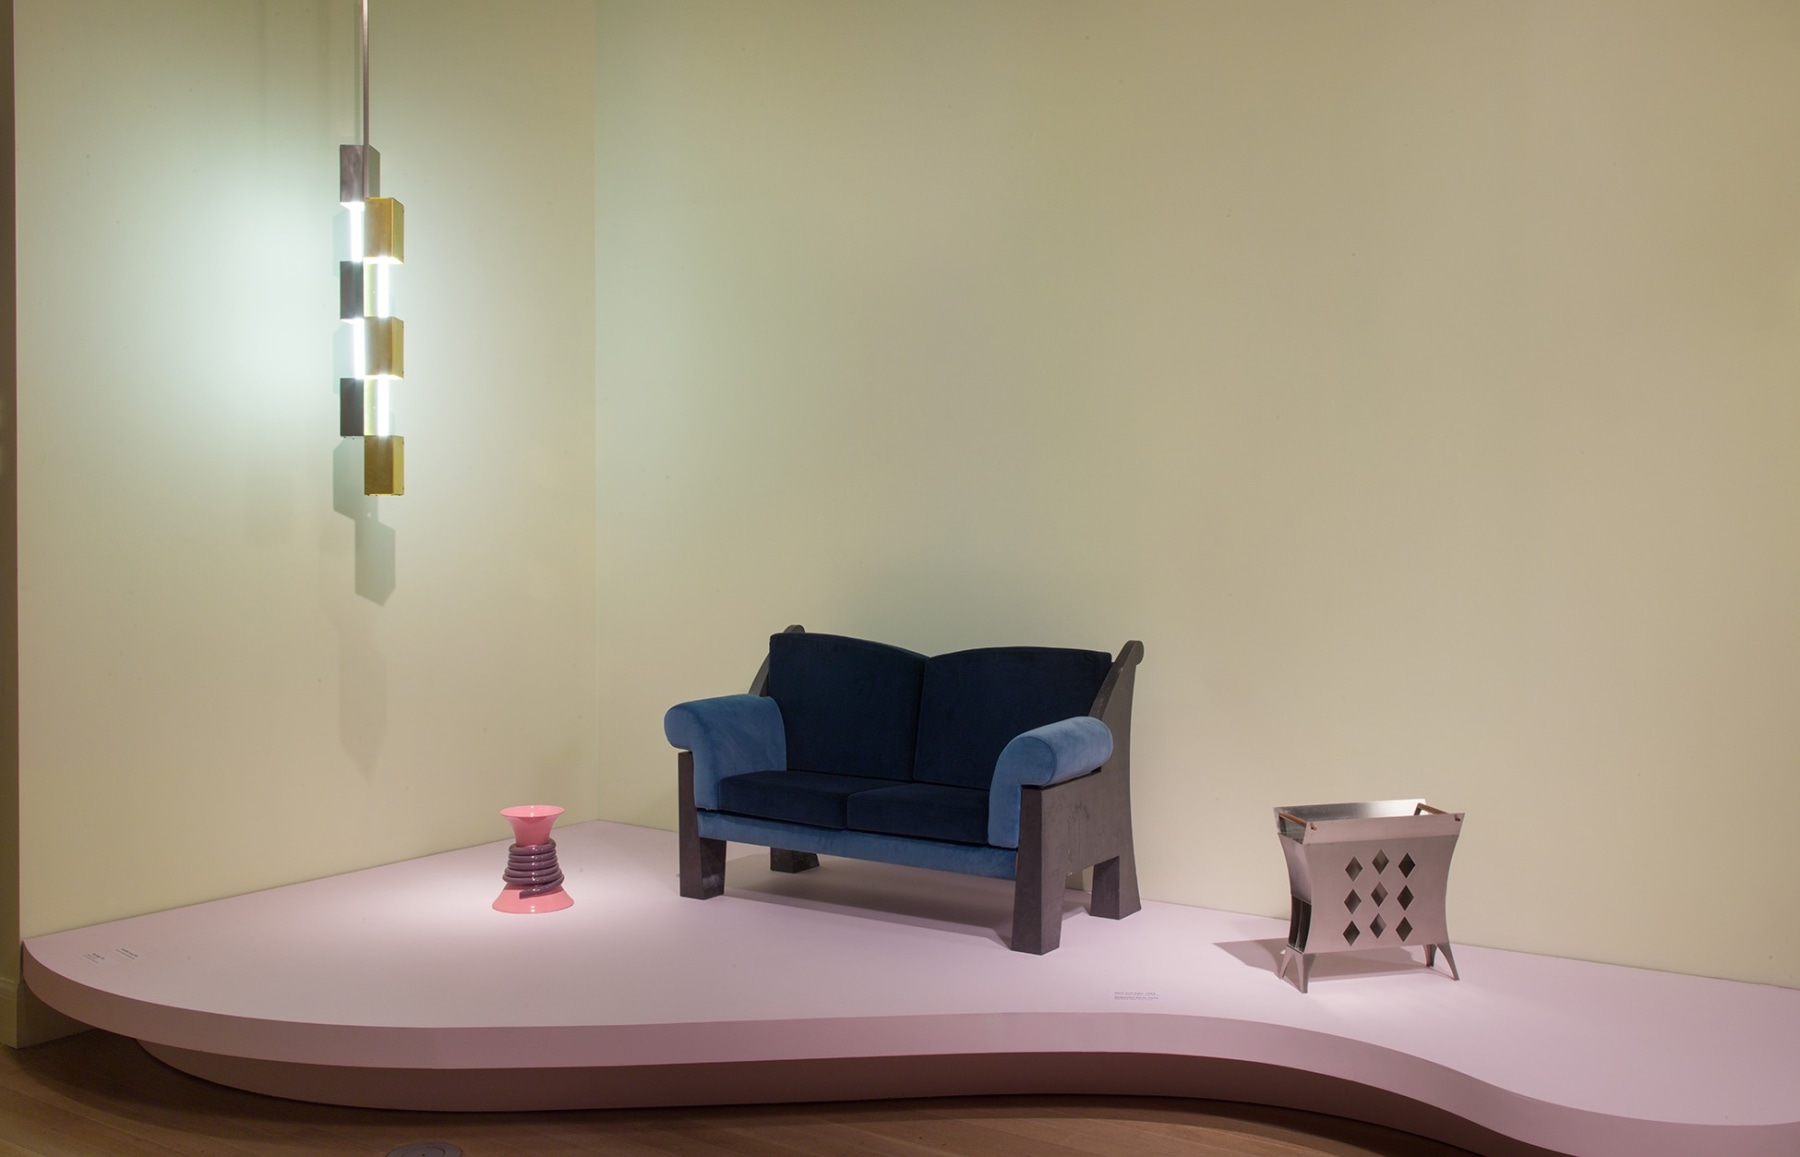 Marc Camille Chaimowicz,&nbsp;Marc Camille Chaimowicz: Your Place or Mine...&nbsp;, March 15 - August 6, 2018,&nbsp;The Jewish Museum, New York